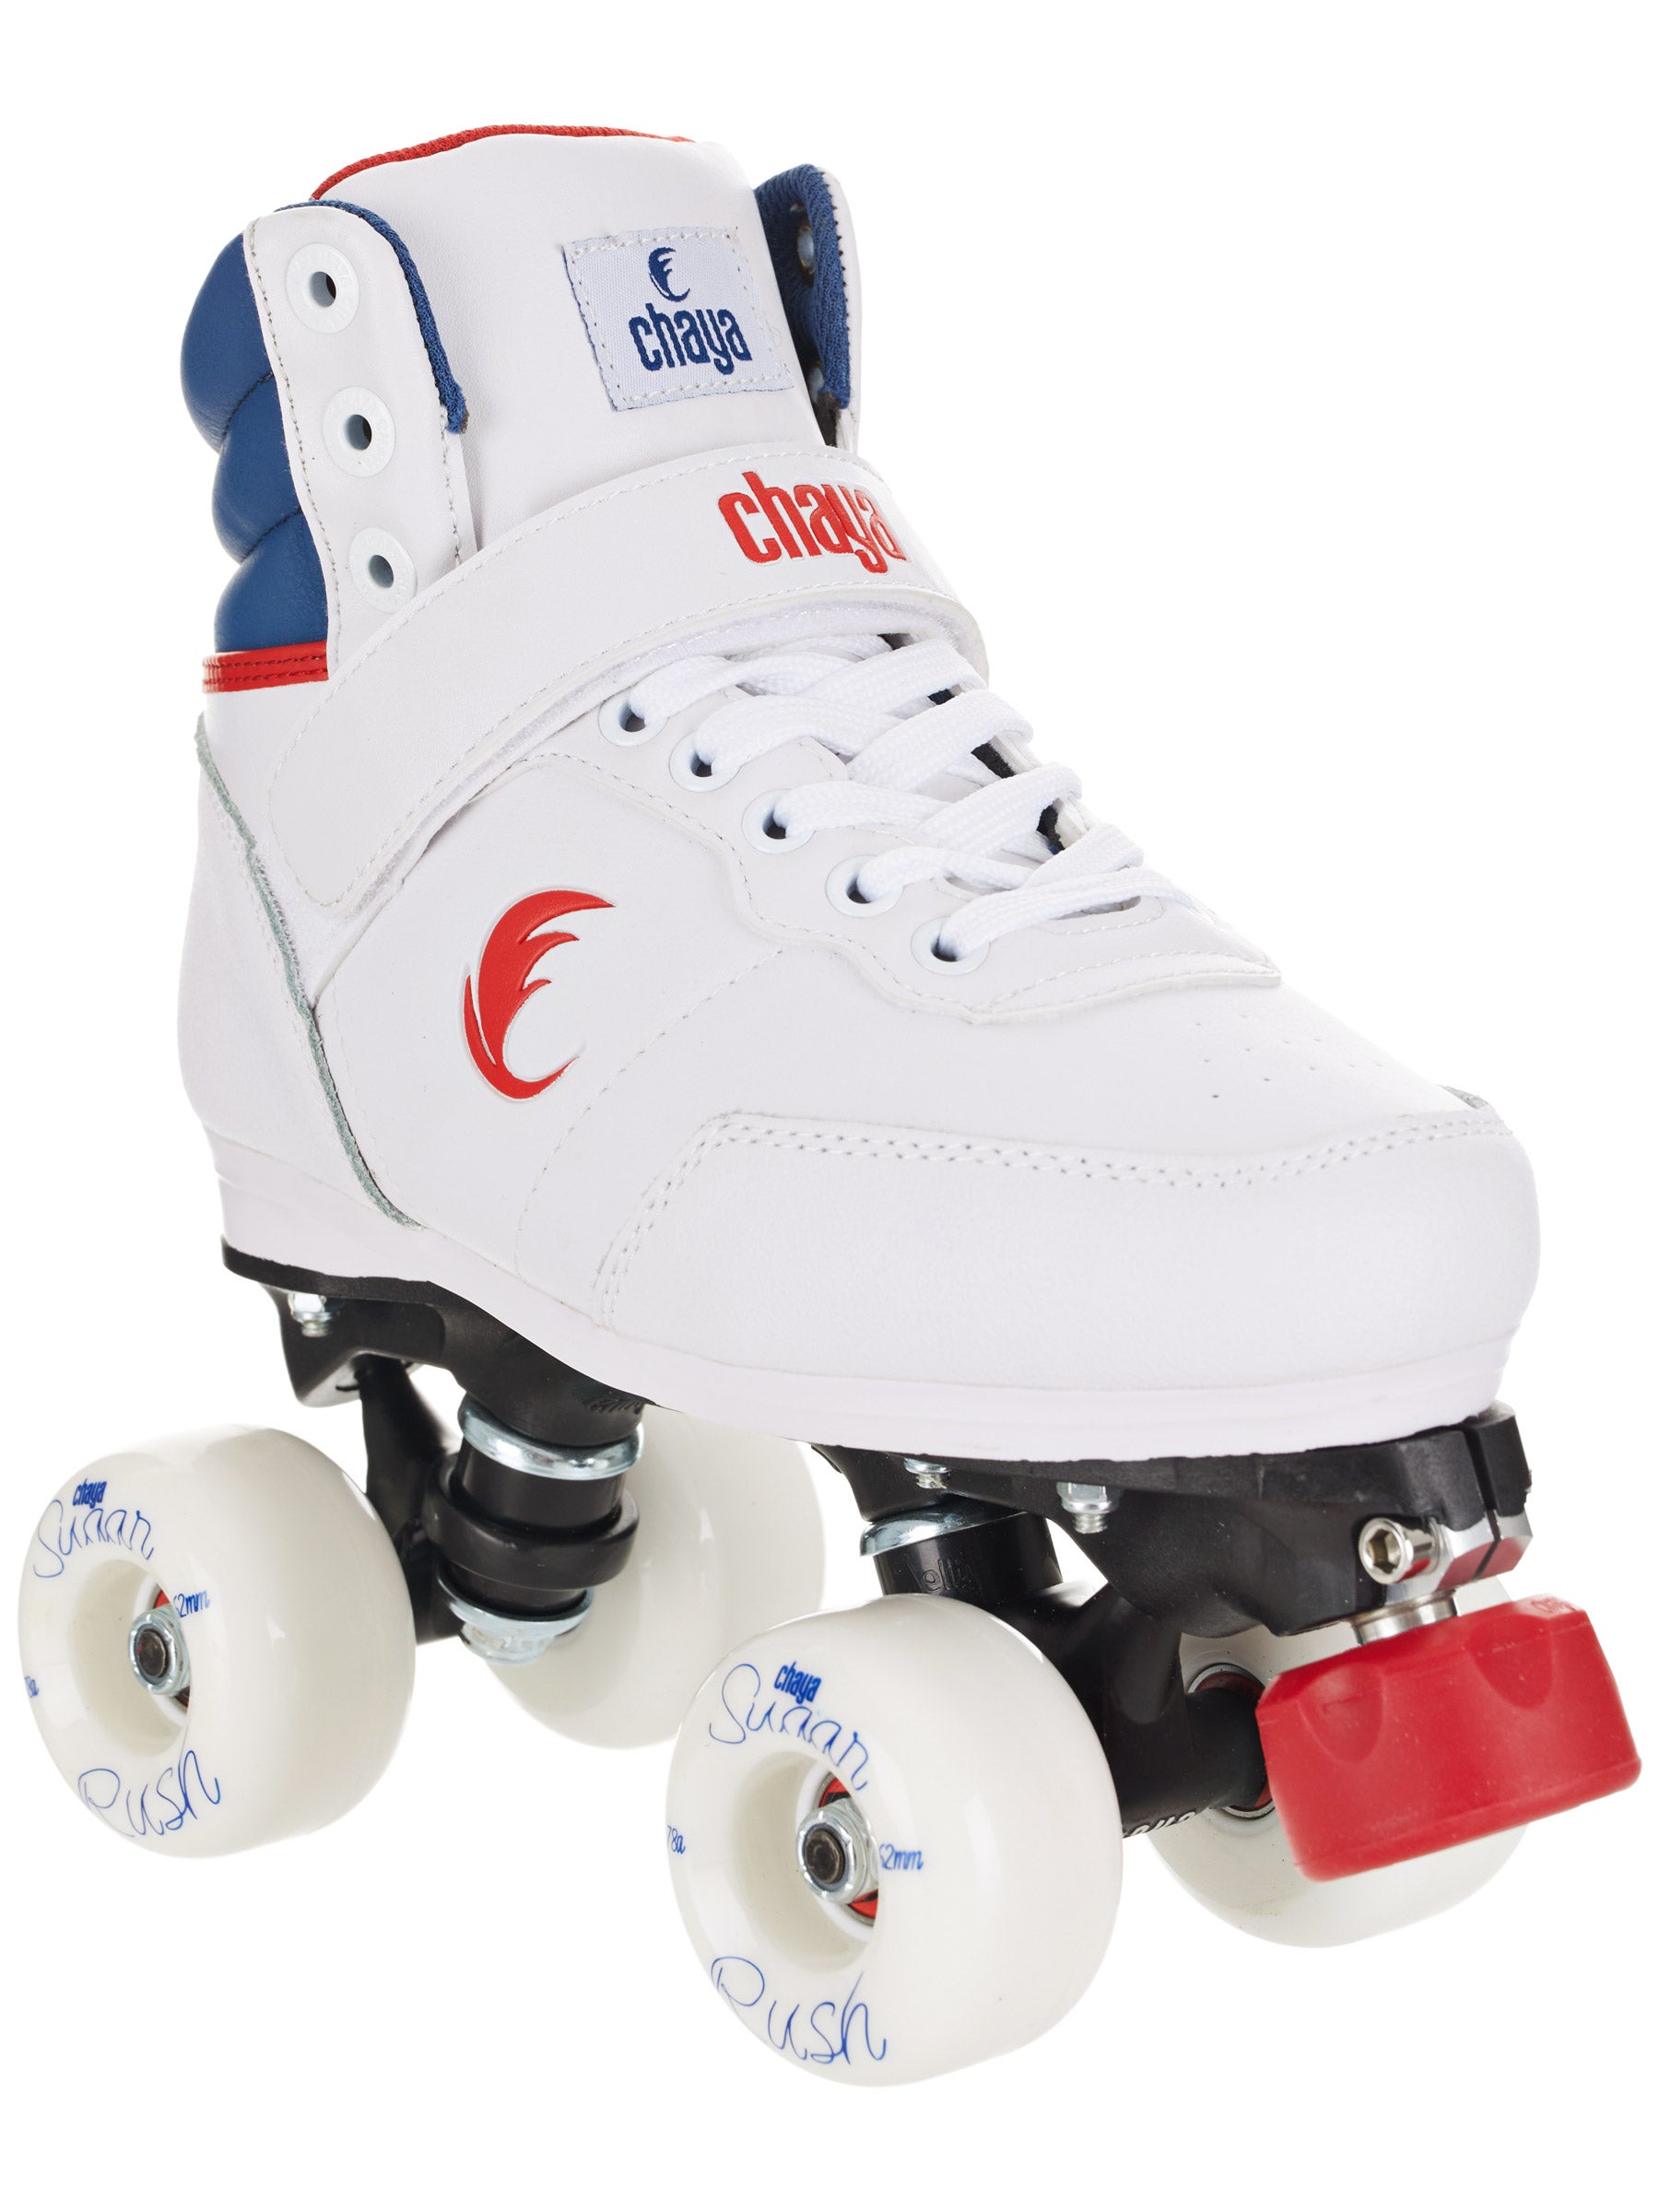 Chaya Jump With Grind Blocks High Roller Skates Free gift with ever purchase 